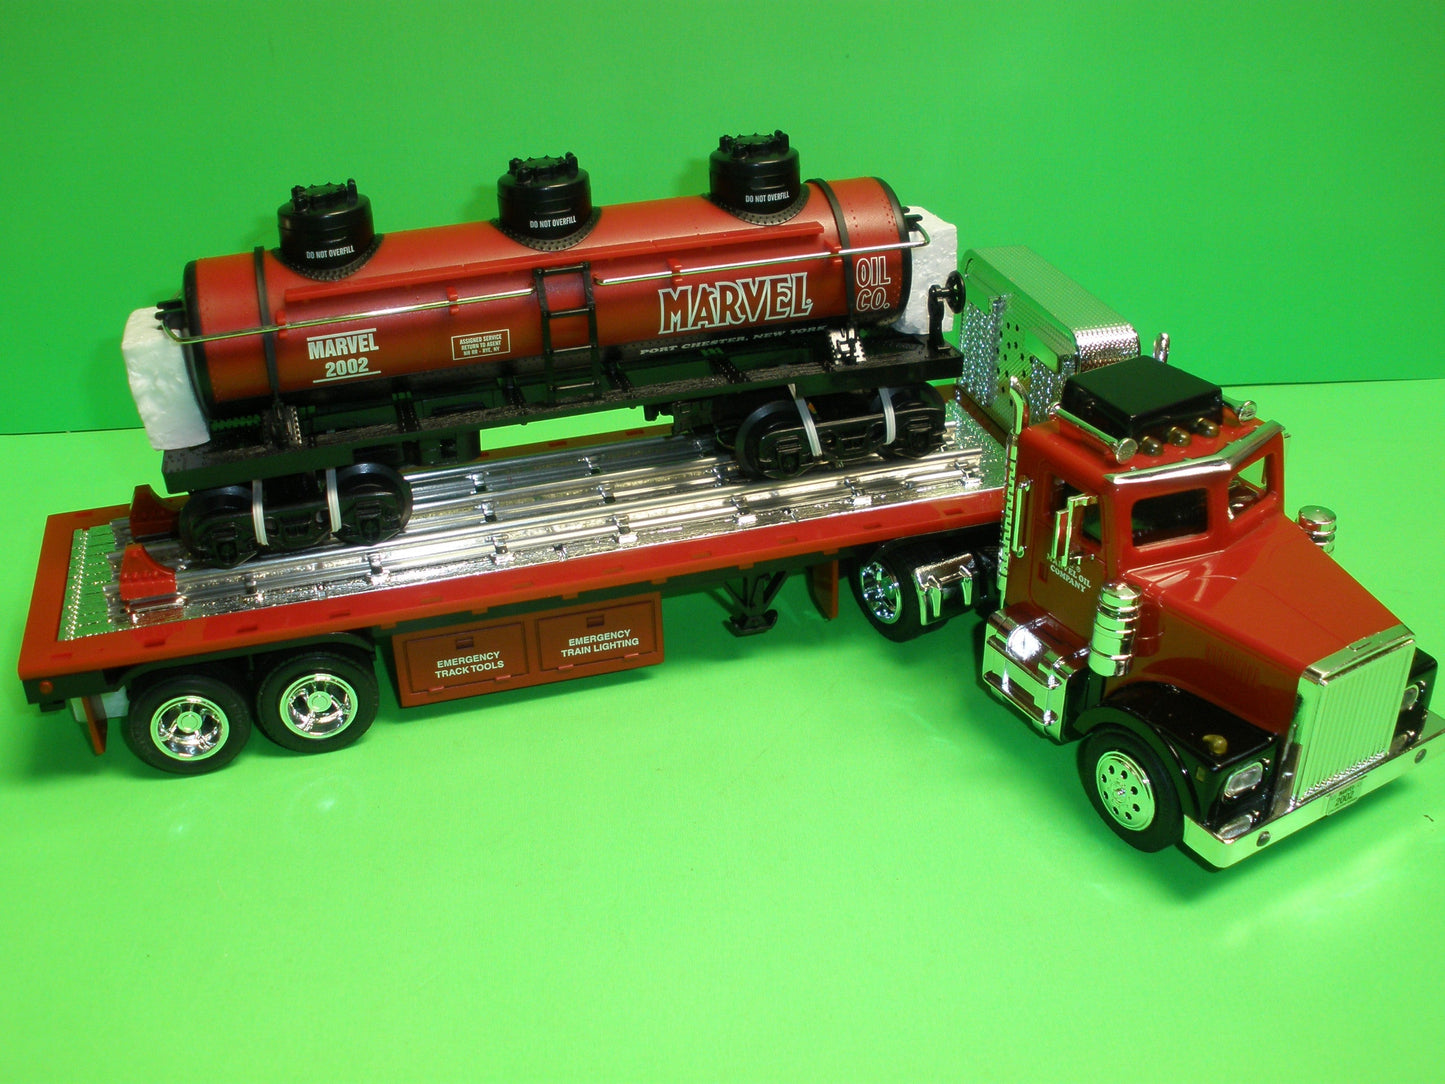 2002 Marvel Mystery Oil Flatbed Tractor Trailer Truck & Train 3 Dome Tanker Car